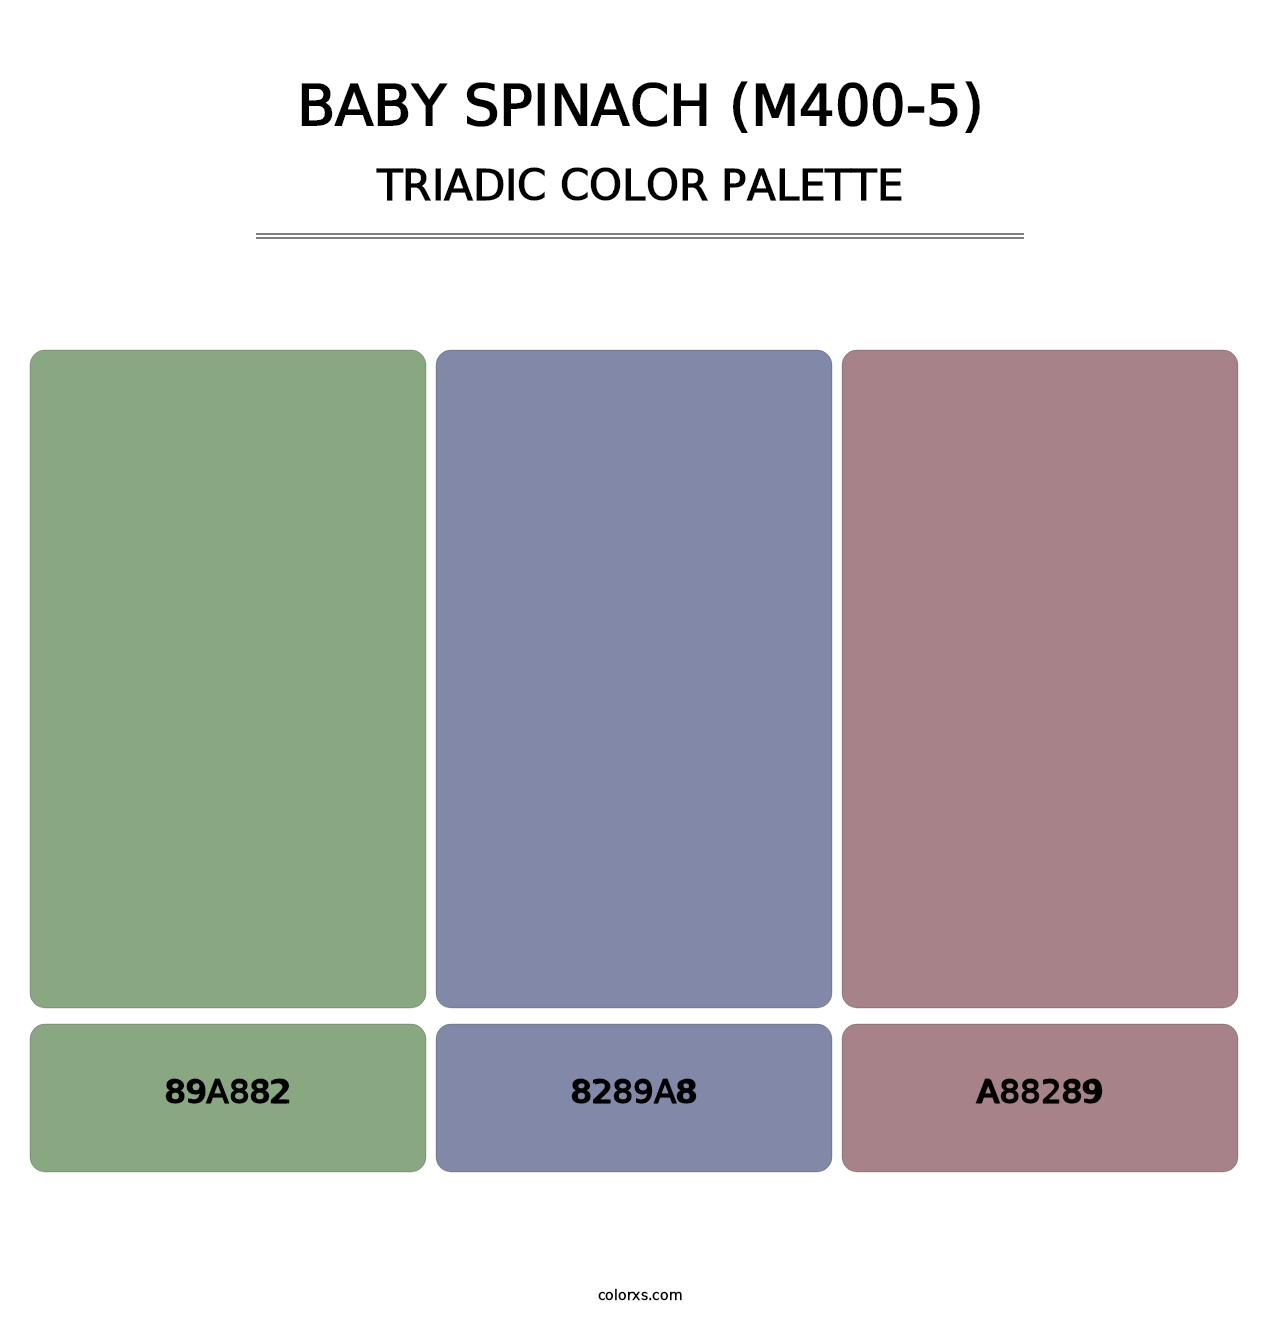 Baby Spinach (M400-5) - Triadic Color Palette